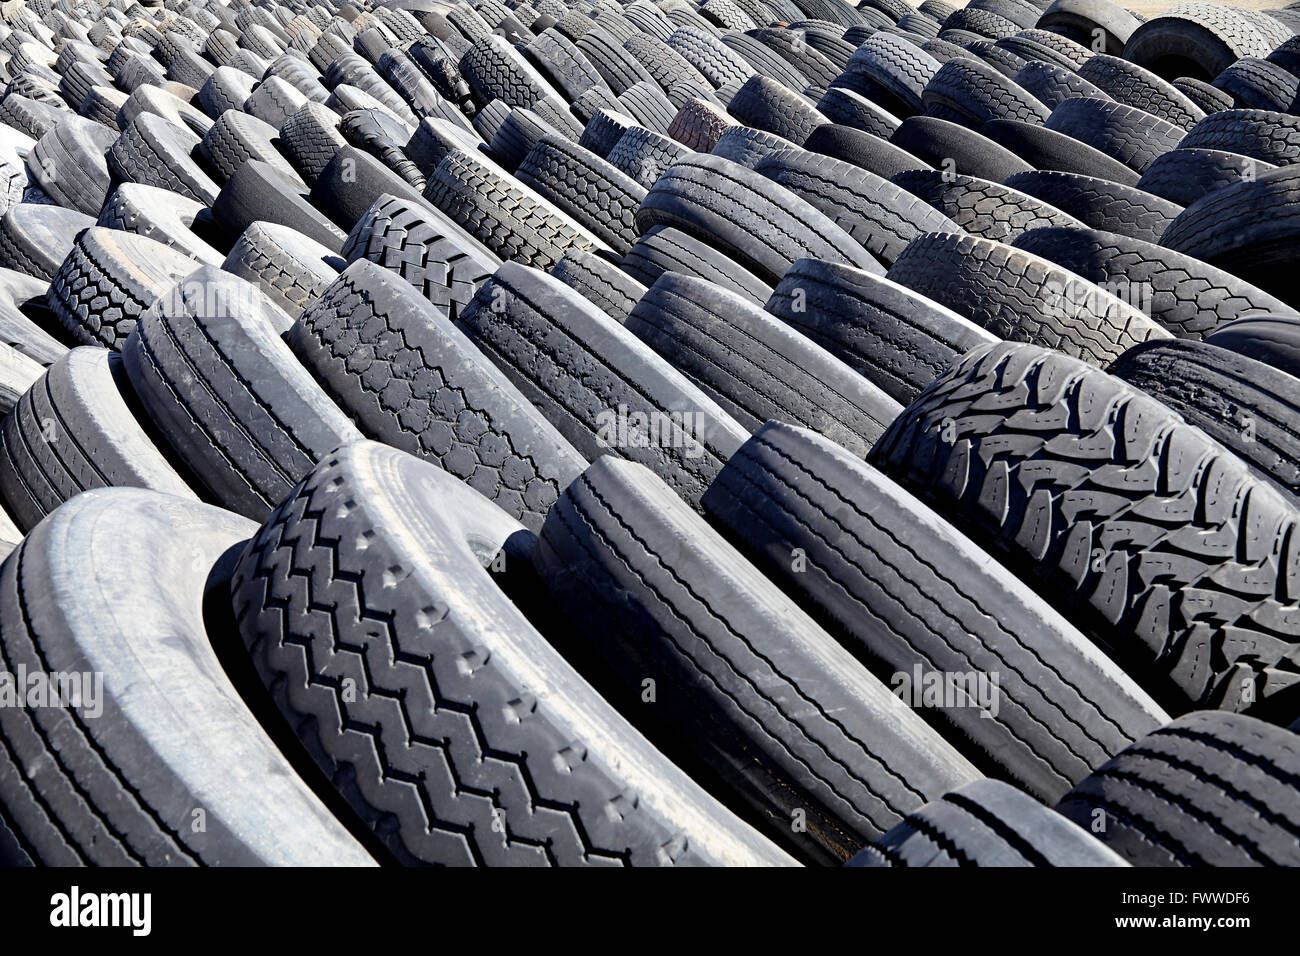 automotive and commercial tires used worn damaged for recycling waste management industry disposal Stock Photo